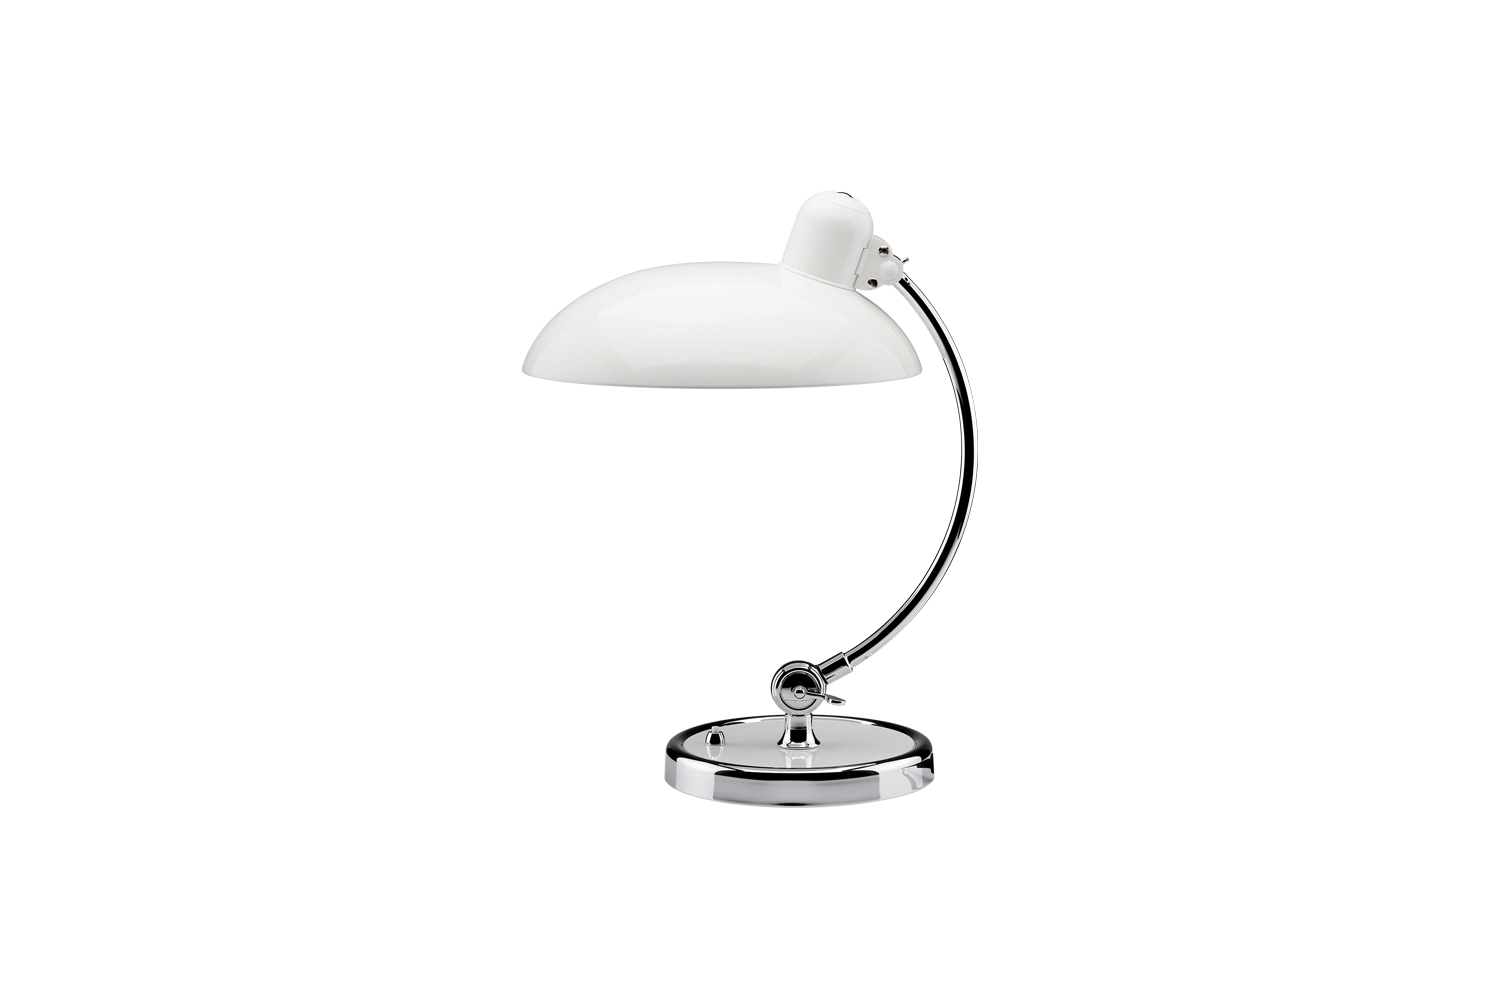 the table lamp is the fritz hansen kaiser idell table lamp in white is €665 a 13